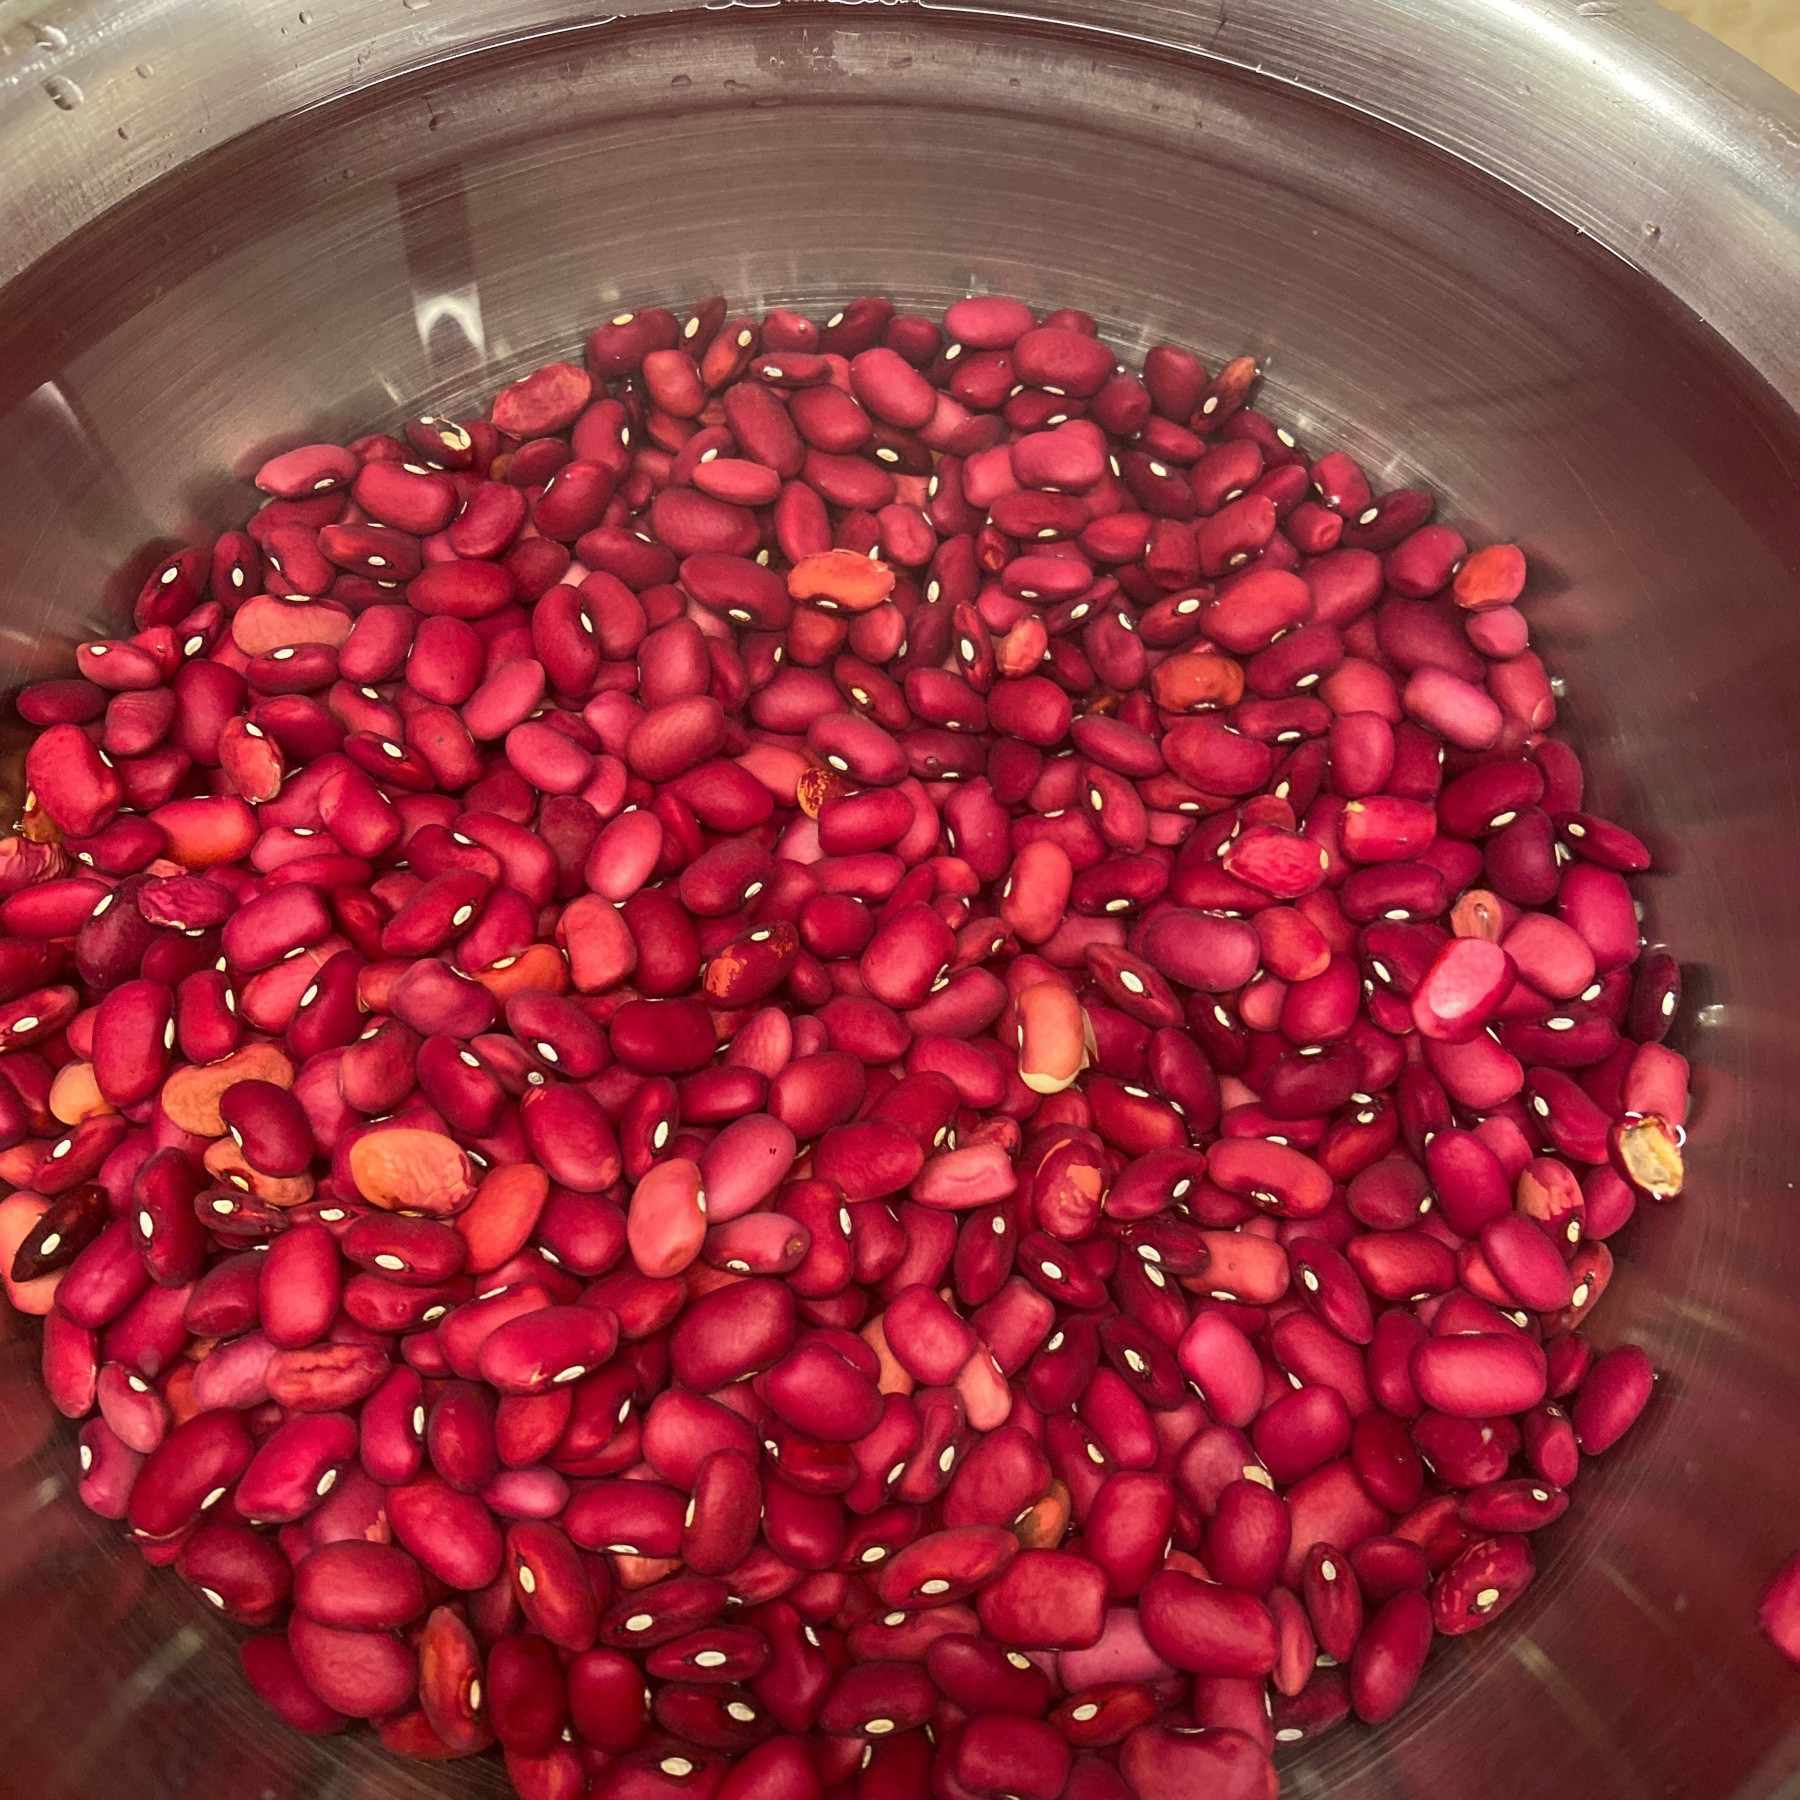 Kidney beans covered in water.